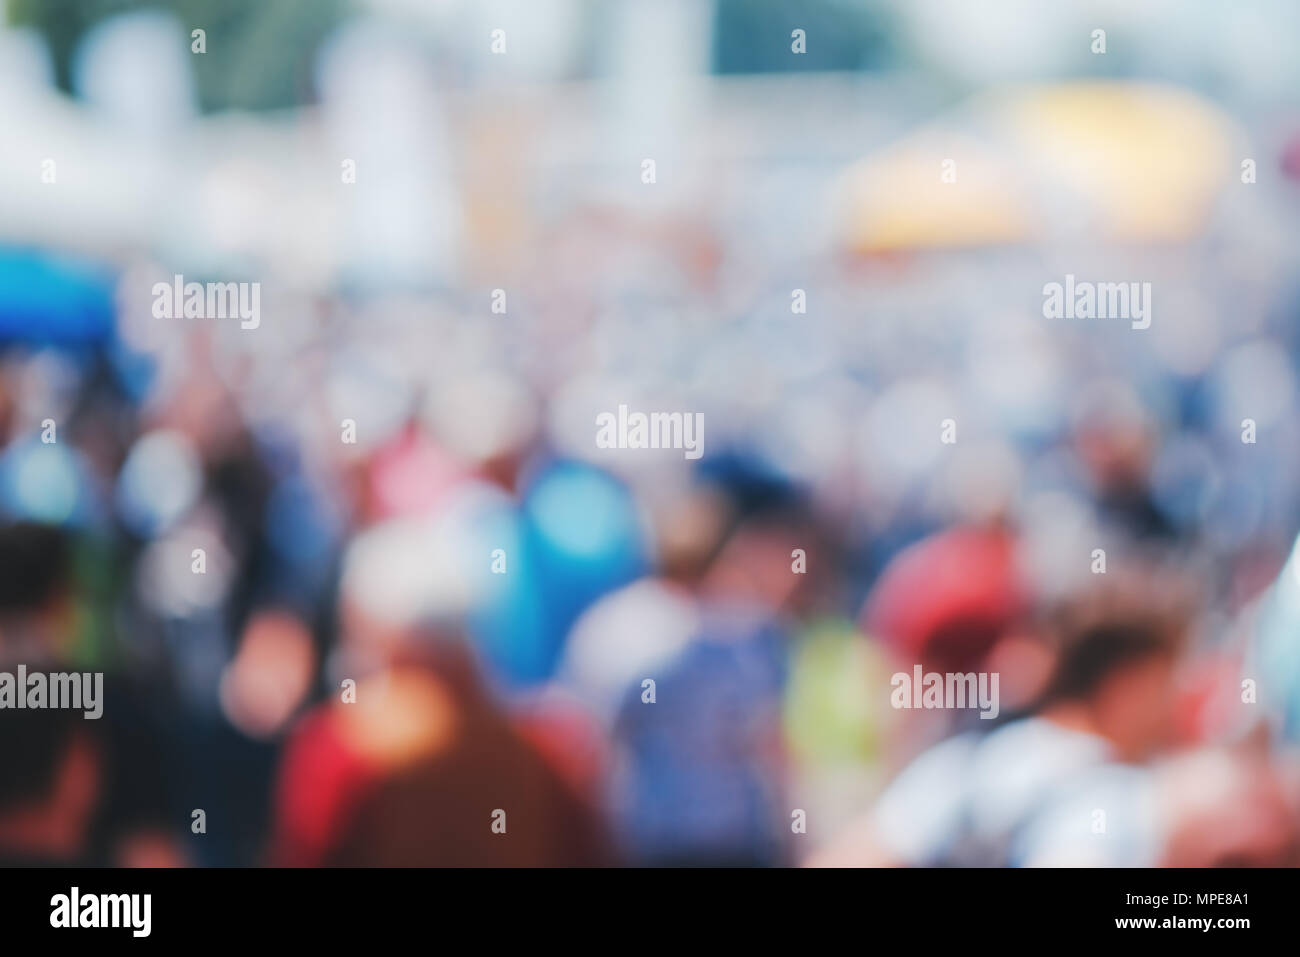 Blurred street crowd as abstract background as web site graphic design element Stock Photo